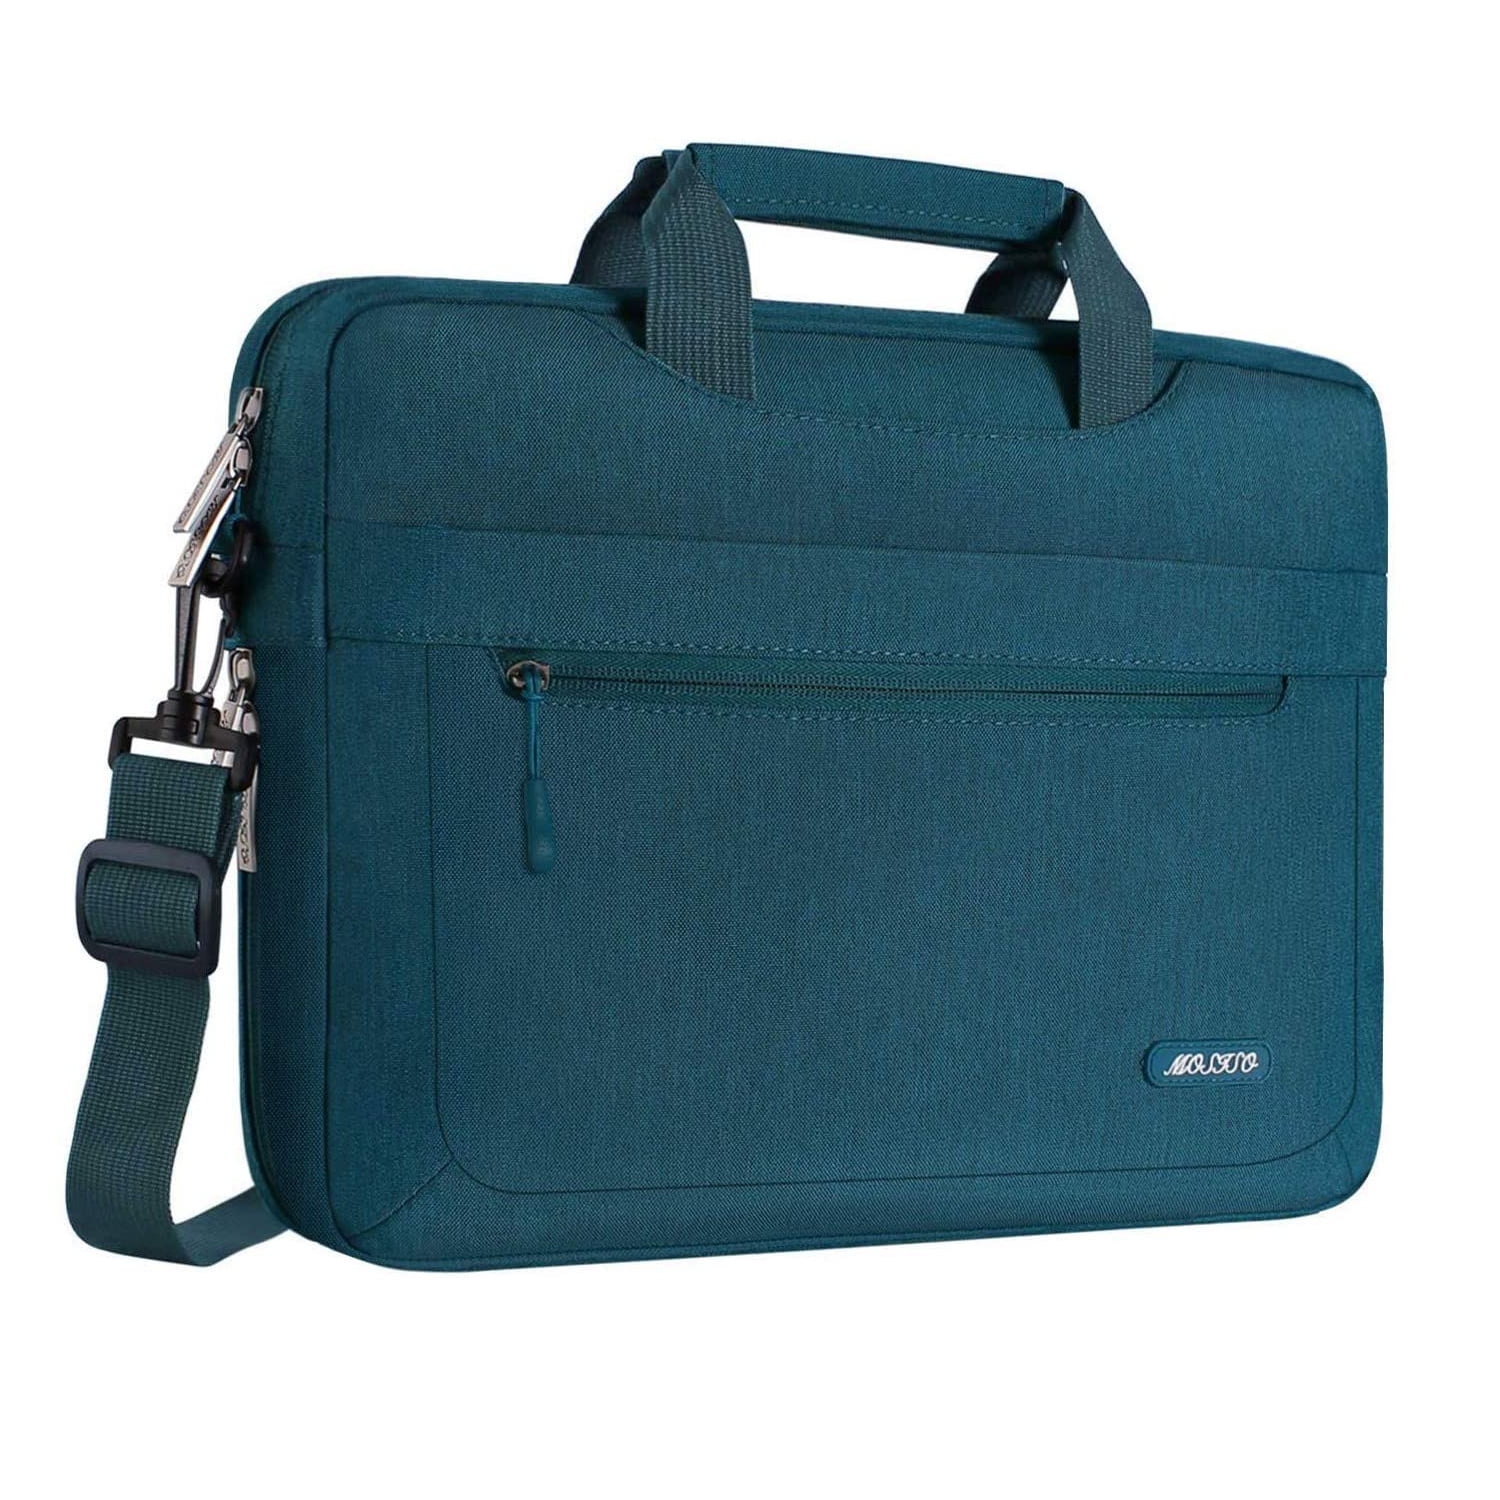 MOSISO Laptop Shoulder Bag Compatible with 17-17.3 inch MacBook/Dell/HP/Lenovo/Acer/Asus/Samsung/Sony Deep Teal Polyester Messenger Carrying Briefcase Sleeve with Adjustable Depth at Bottom 